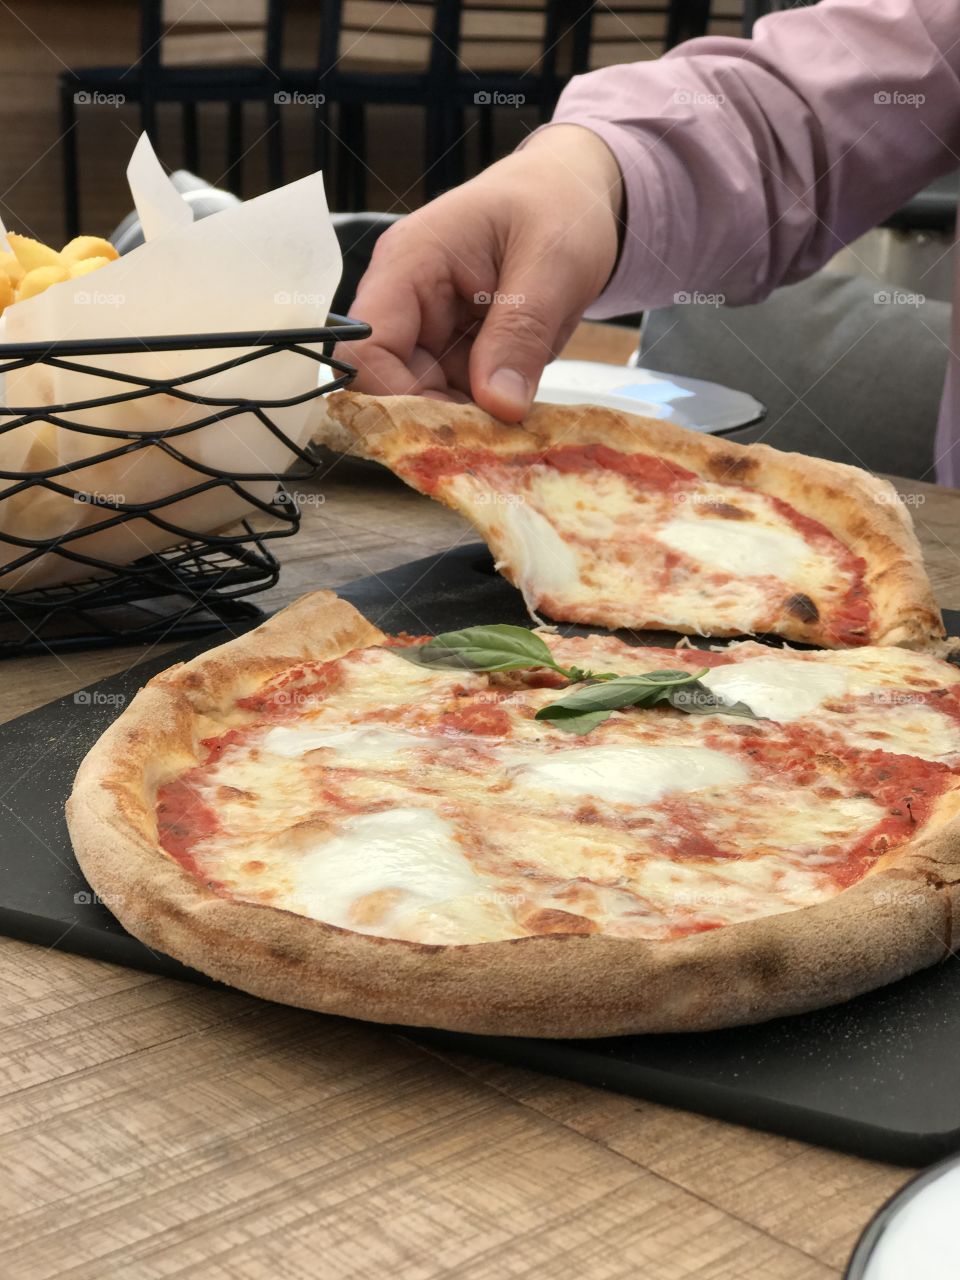 Fresh Italian pizza on a wood table. Delicious Pizza Margherita. Taking a slice of pizza 